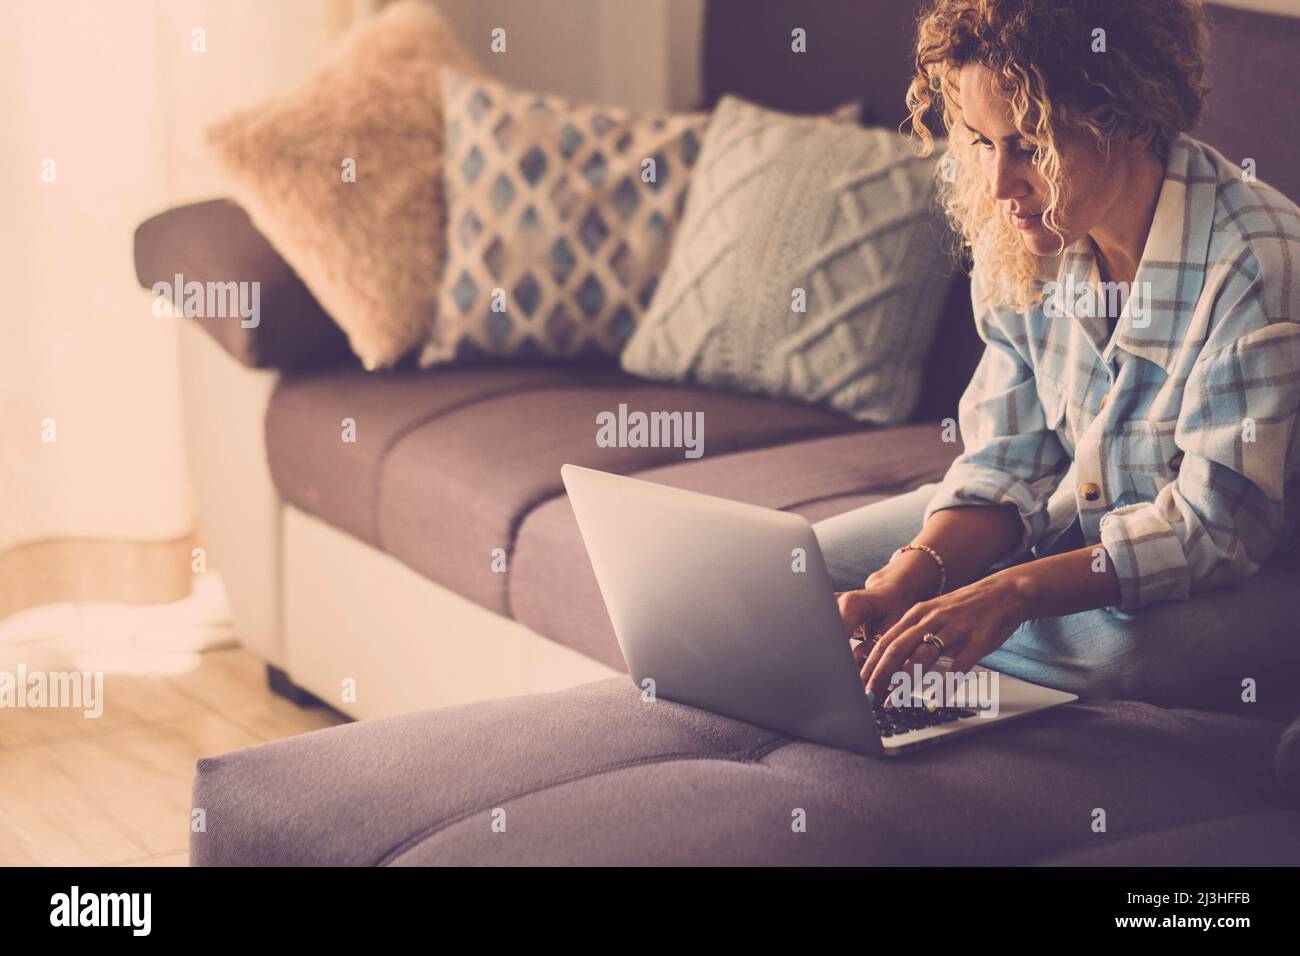 Modern woman working online with laptop computer comfortably sitting on the sofa at home. Stock Photo